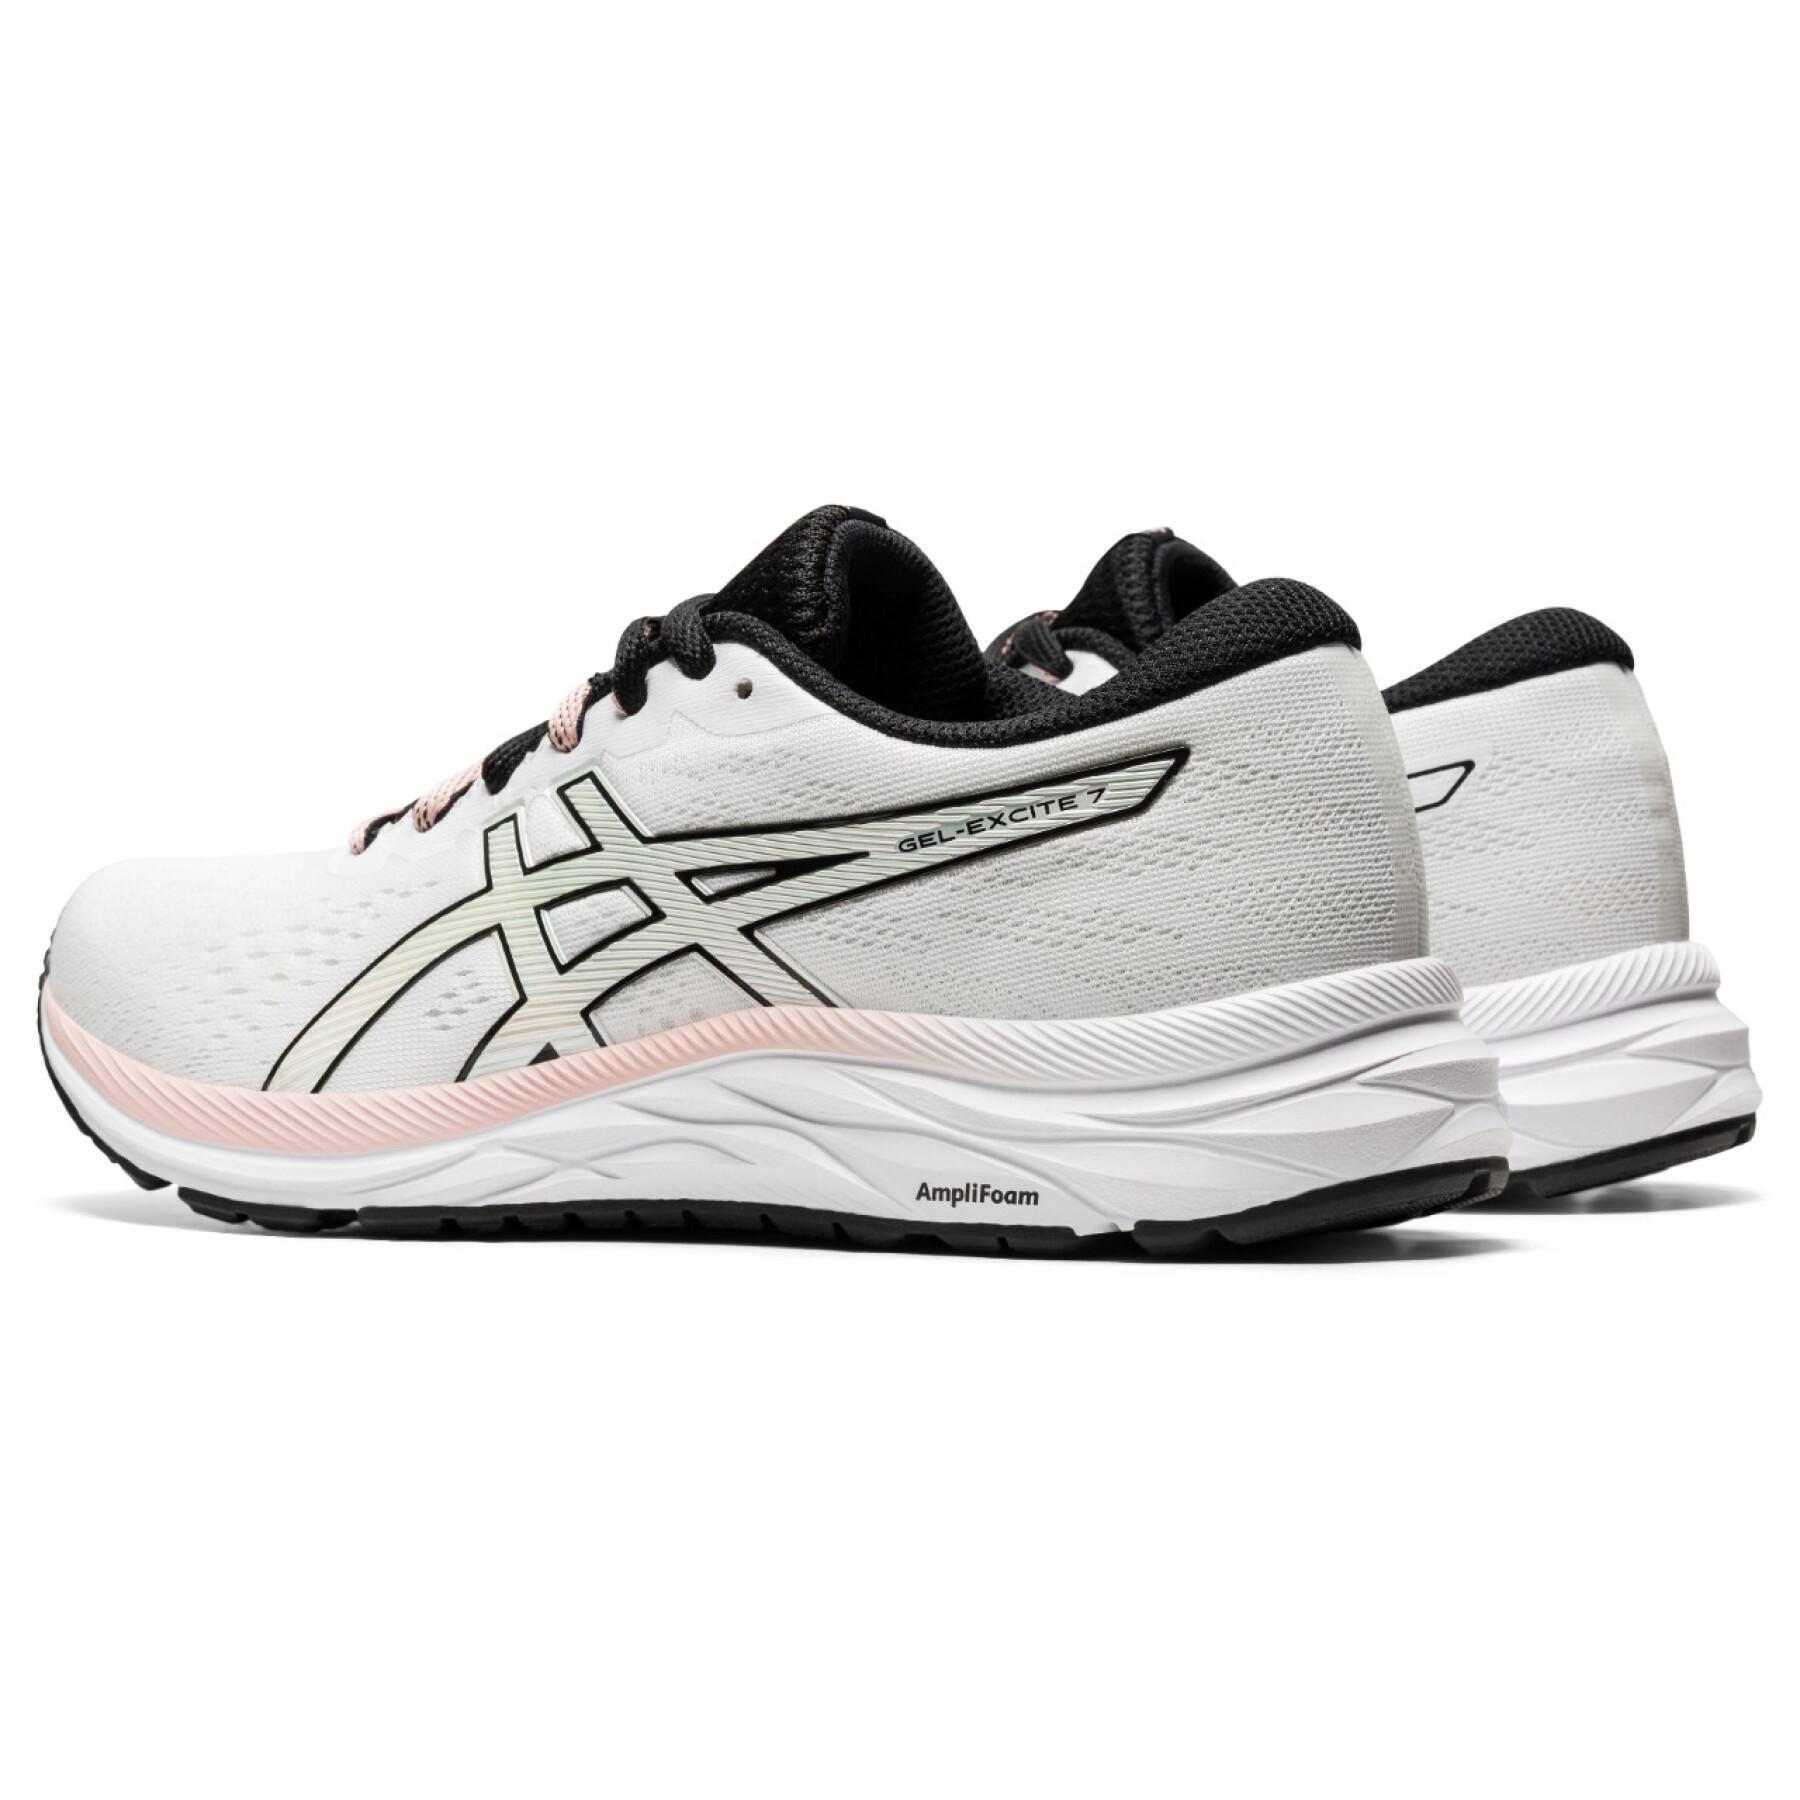 Women's shoes Asics Gel-Excite 7